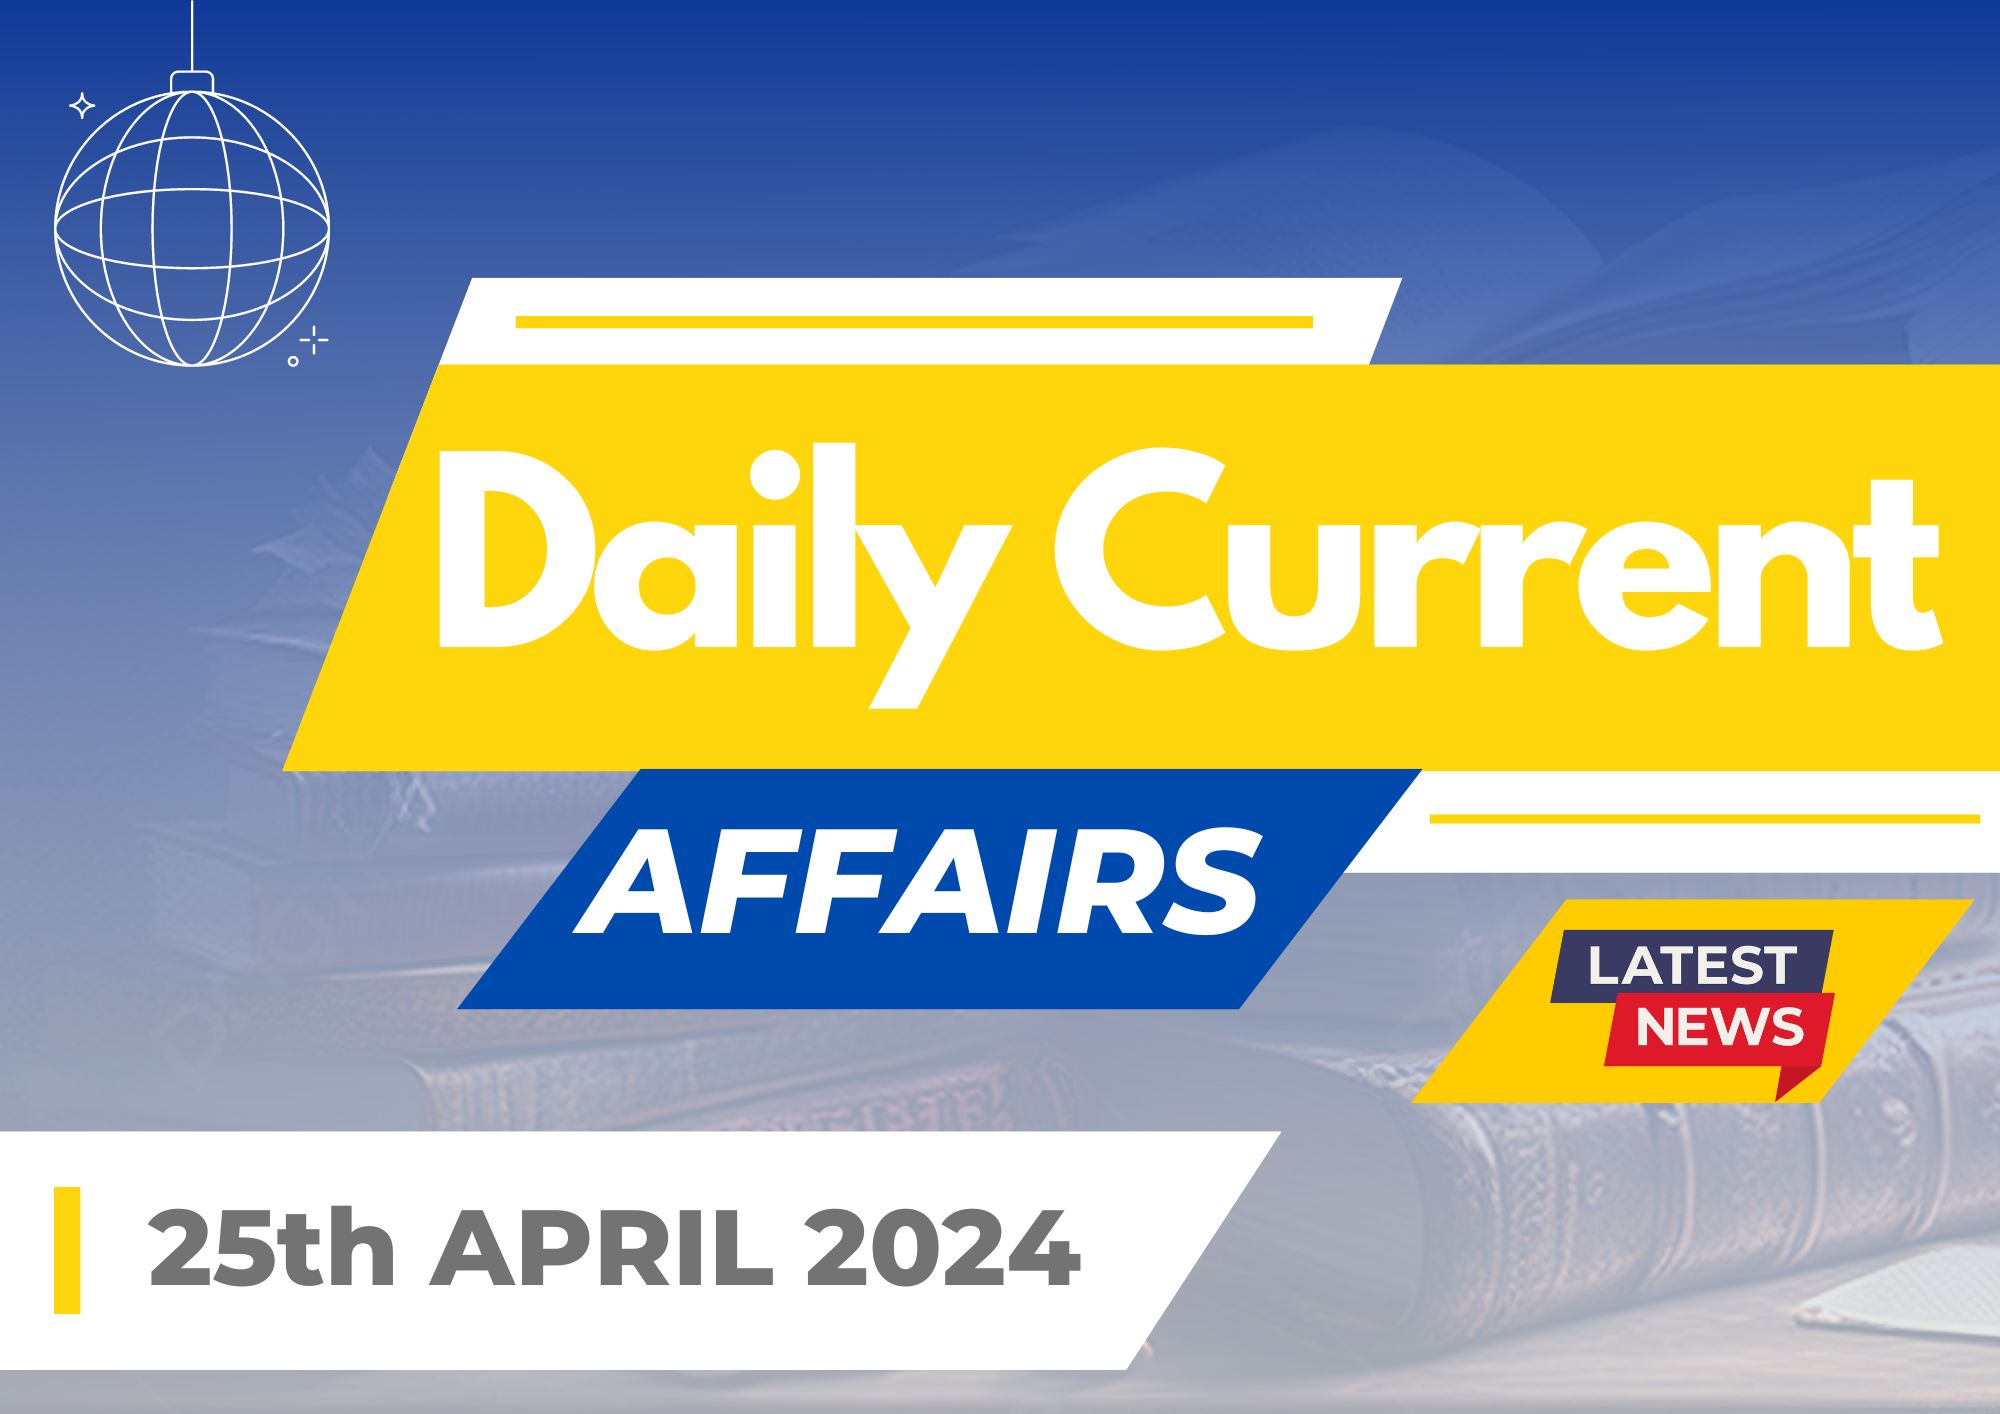 Current Affairs 25th April 2024